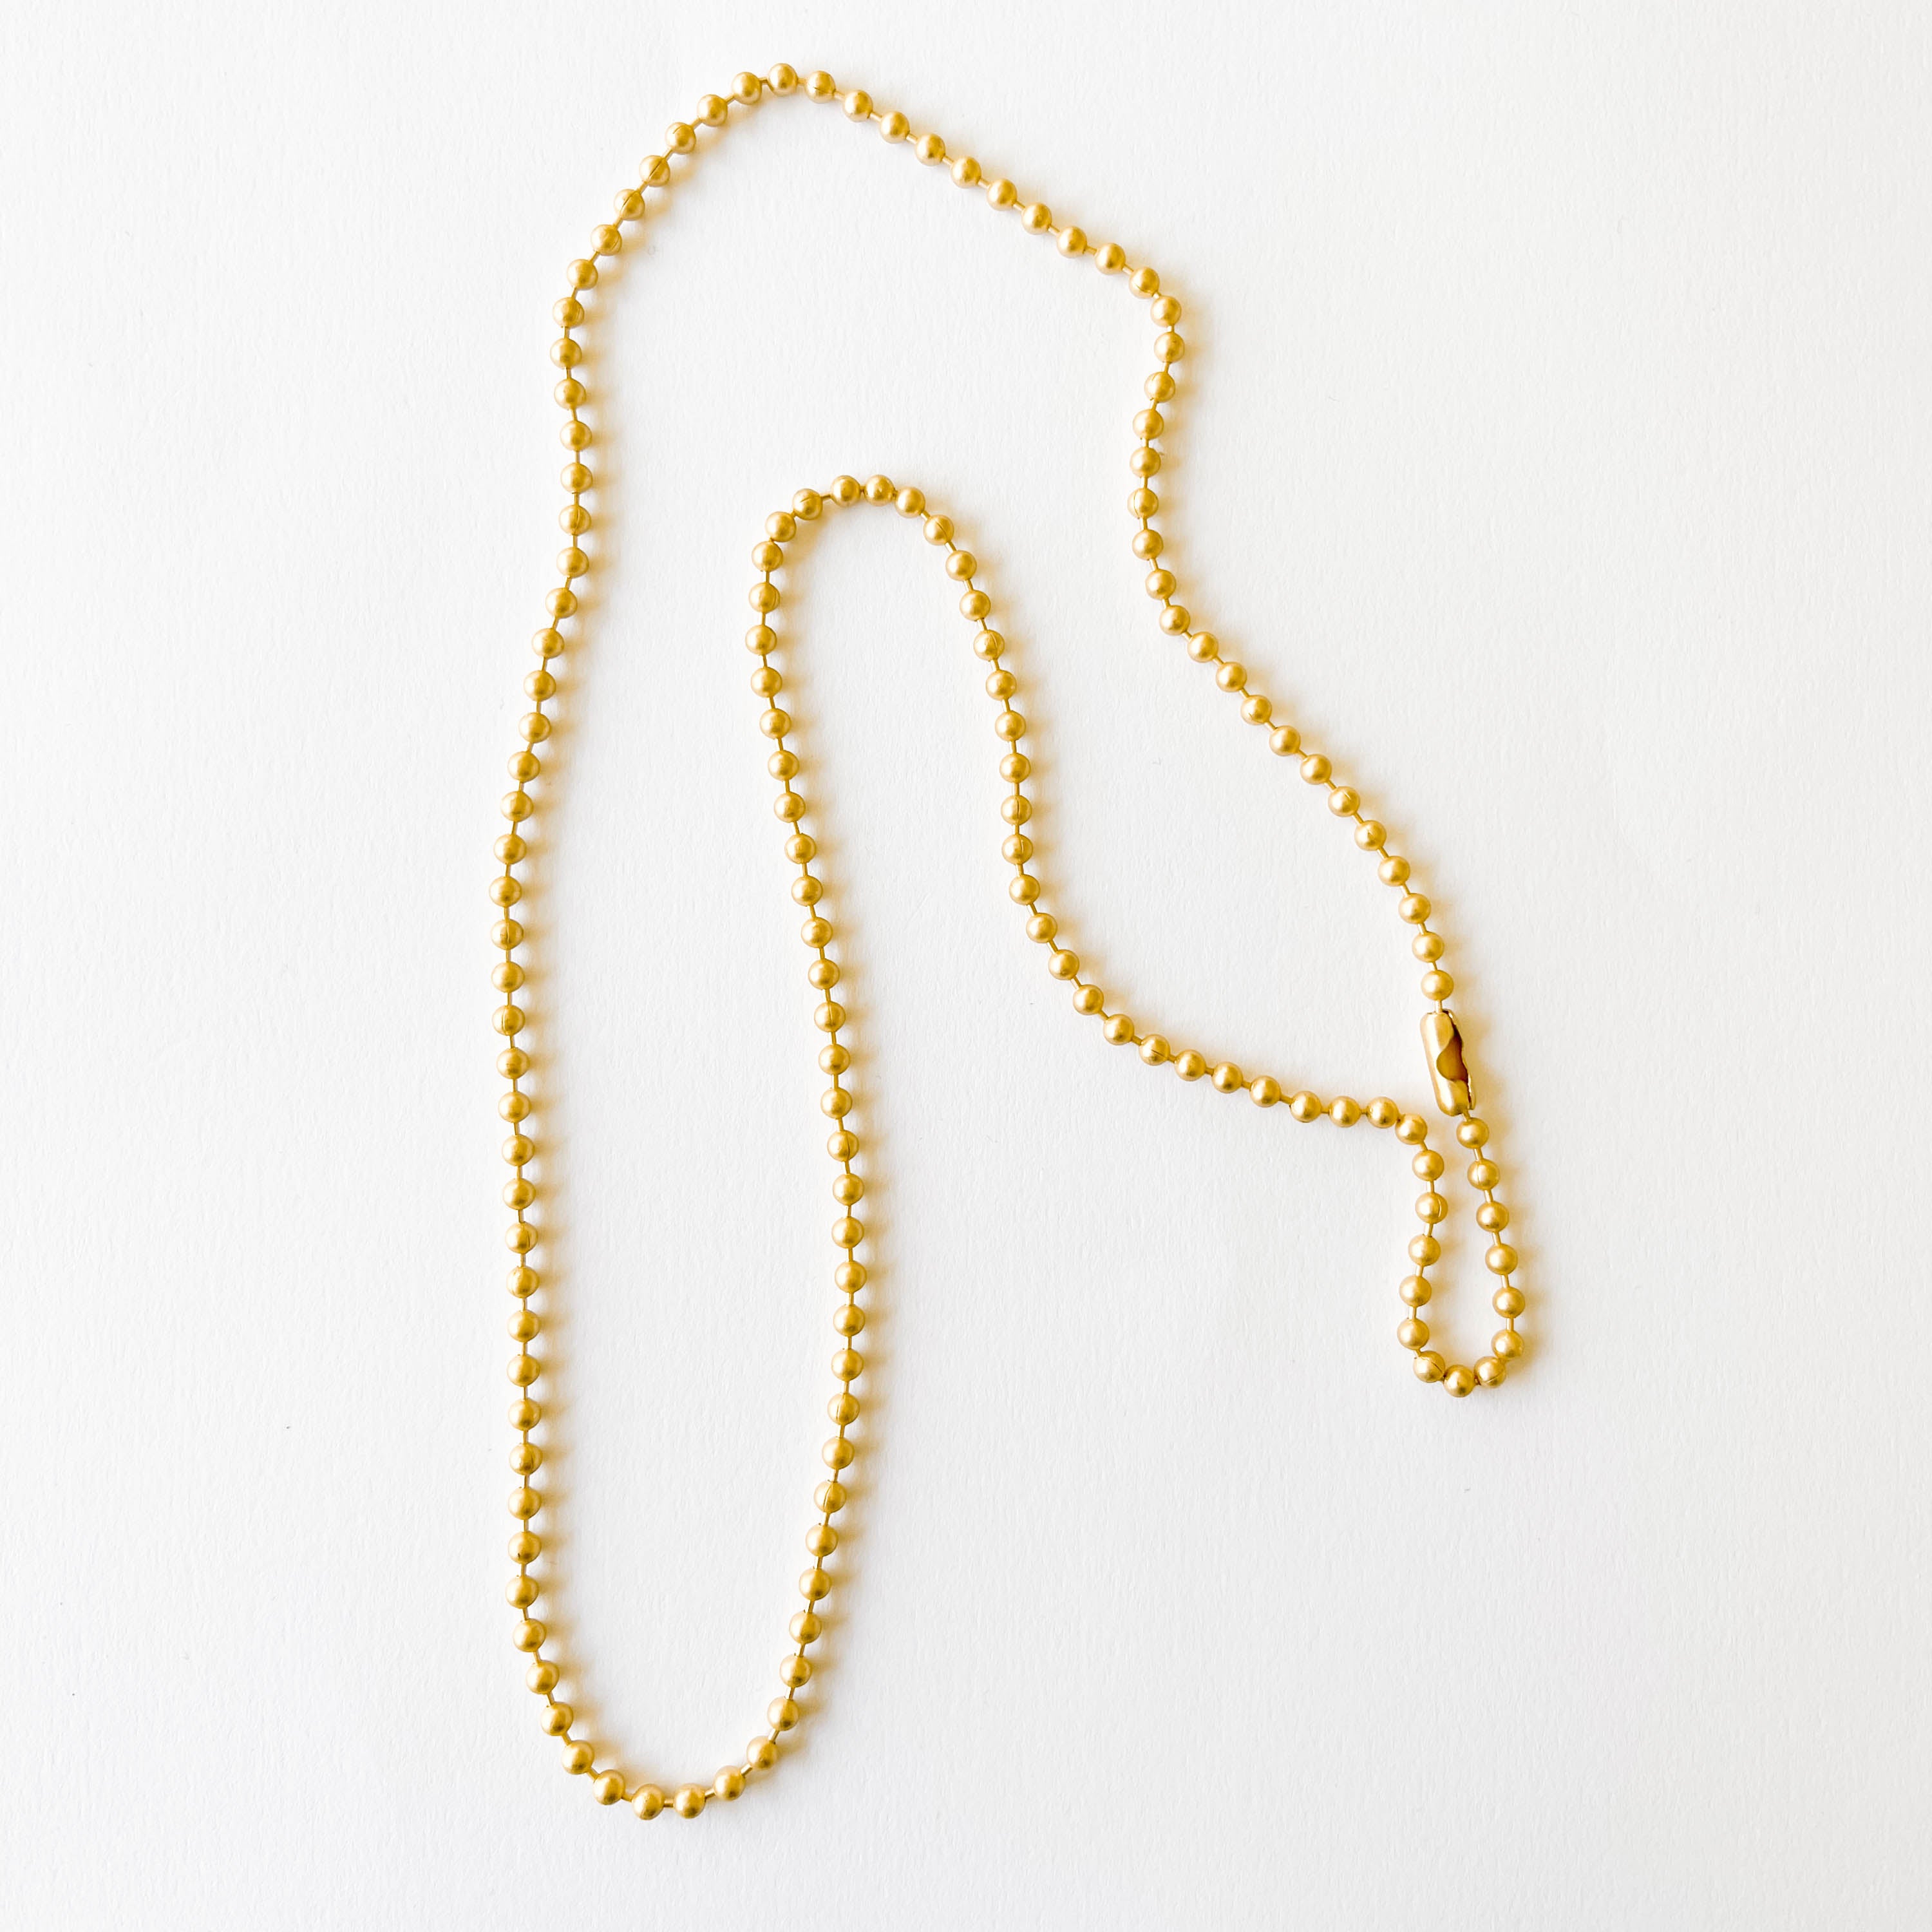 Oversize Gold Ball Chain Necklace - Nest Pretty Things